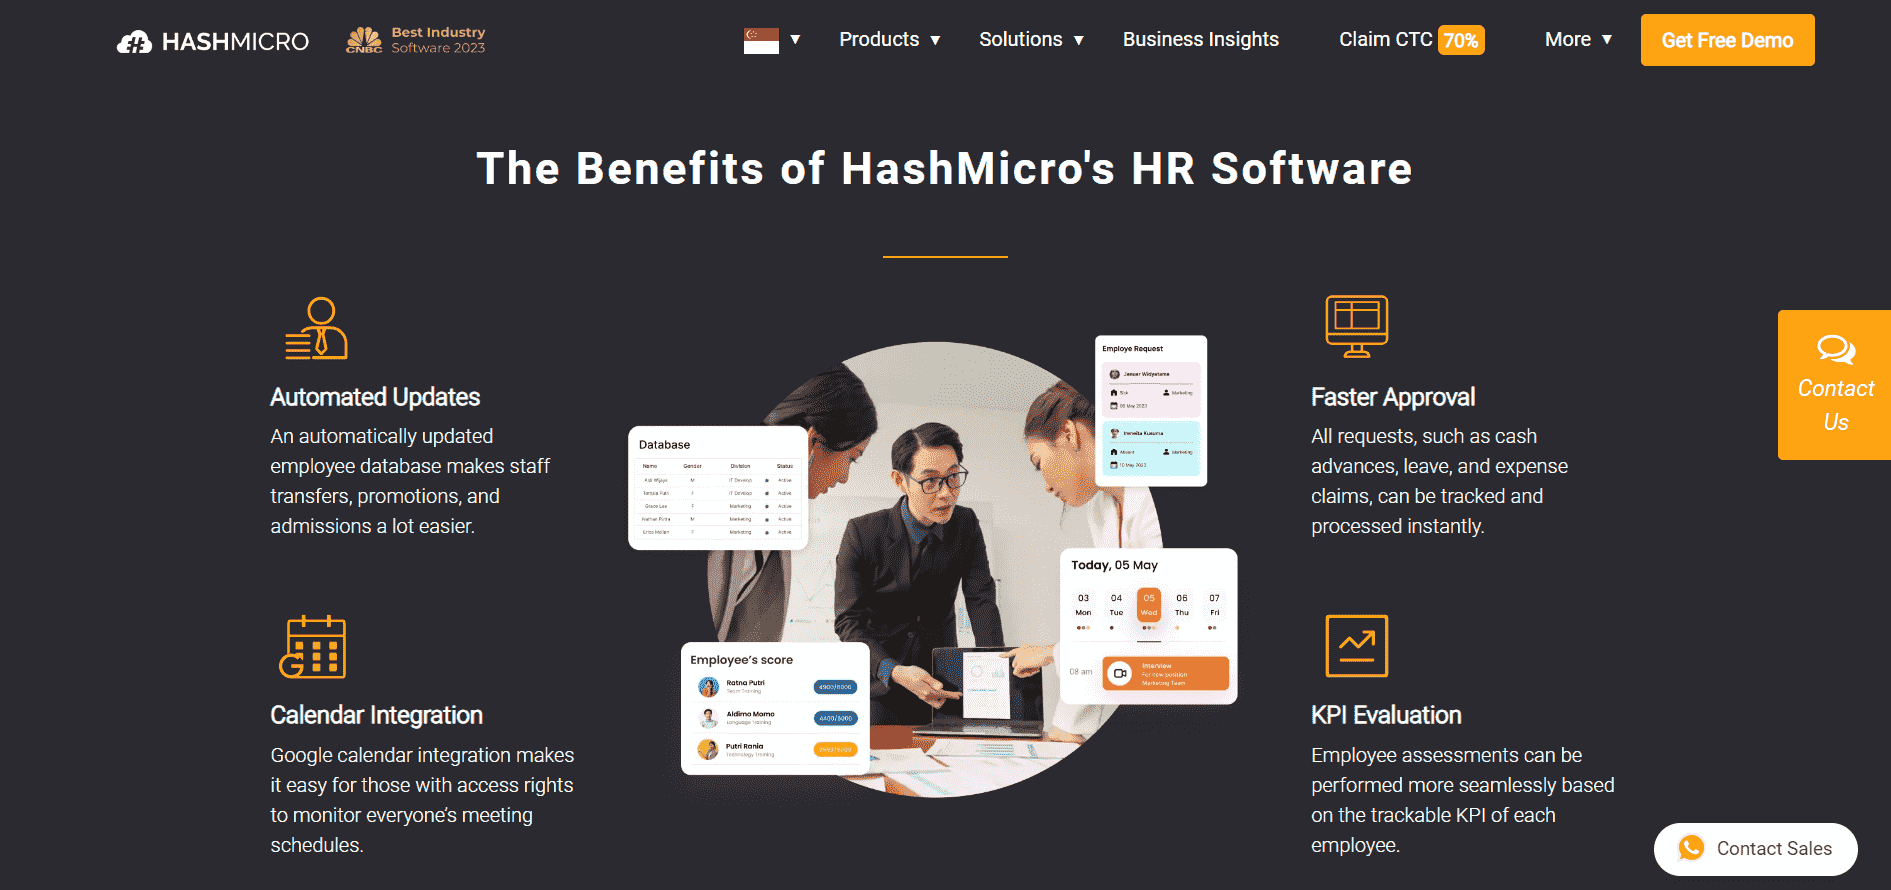 Homepage image of Hashmicro, mentioning about the benefits can get from using this software